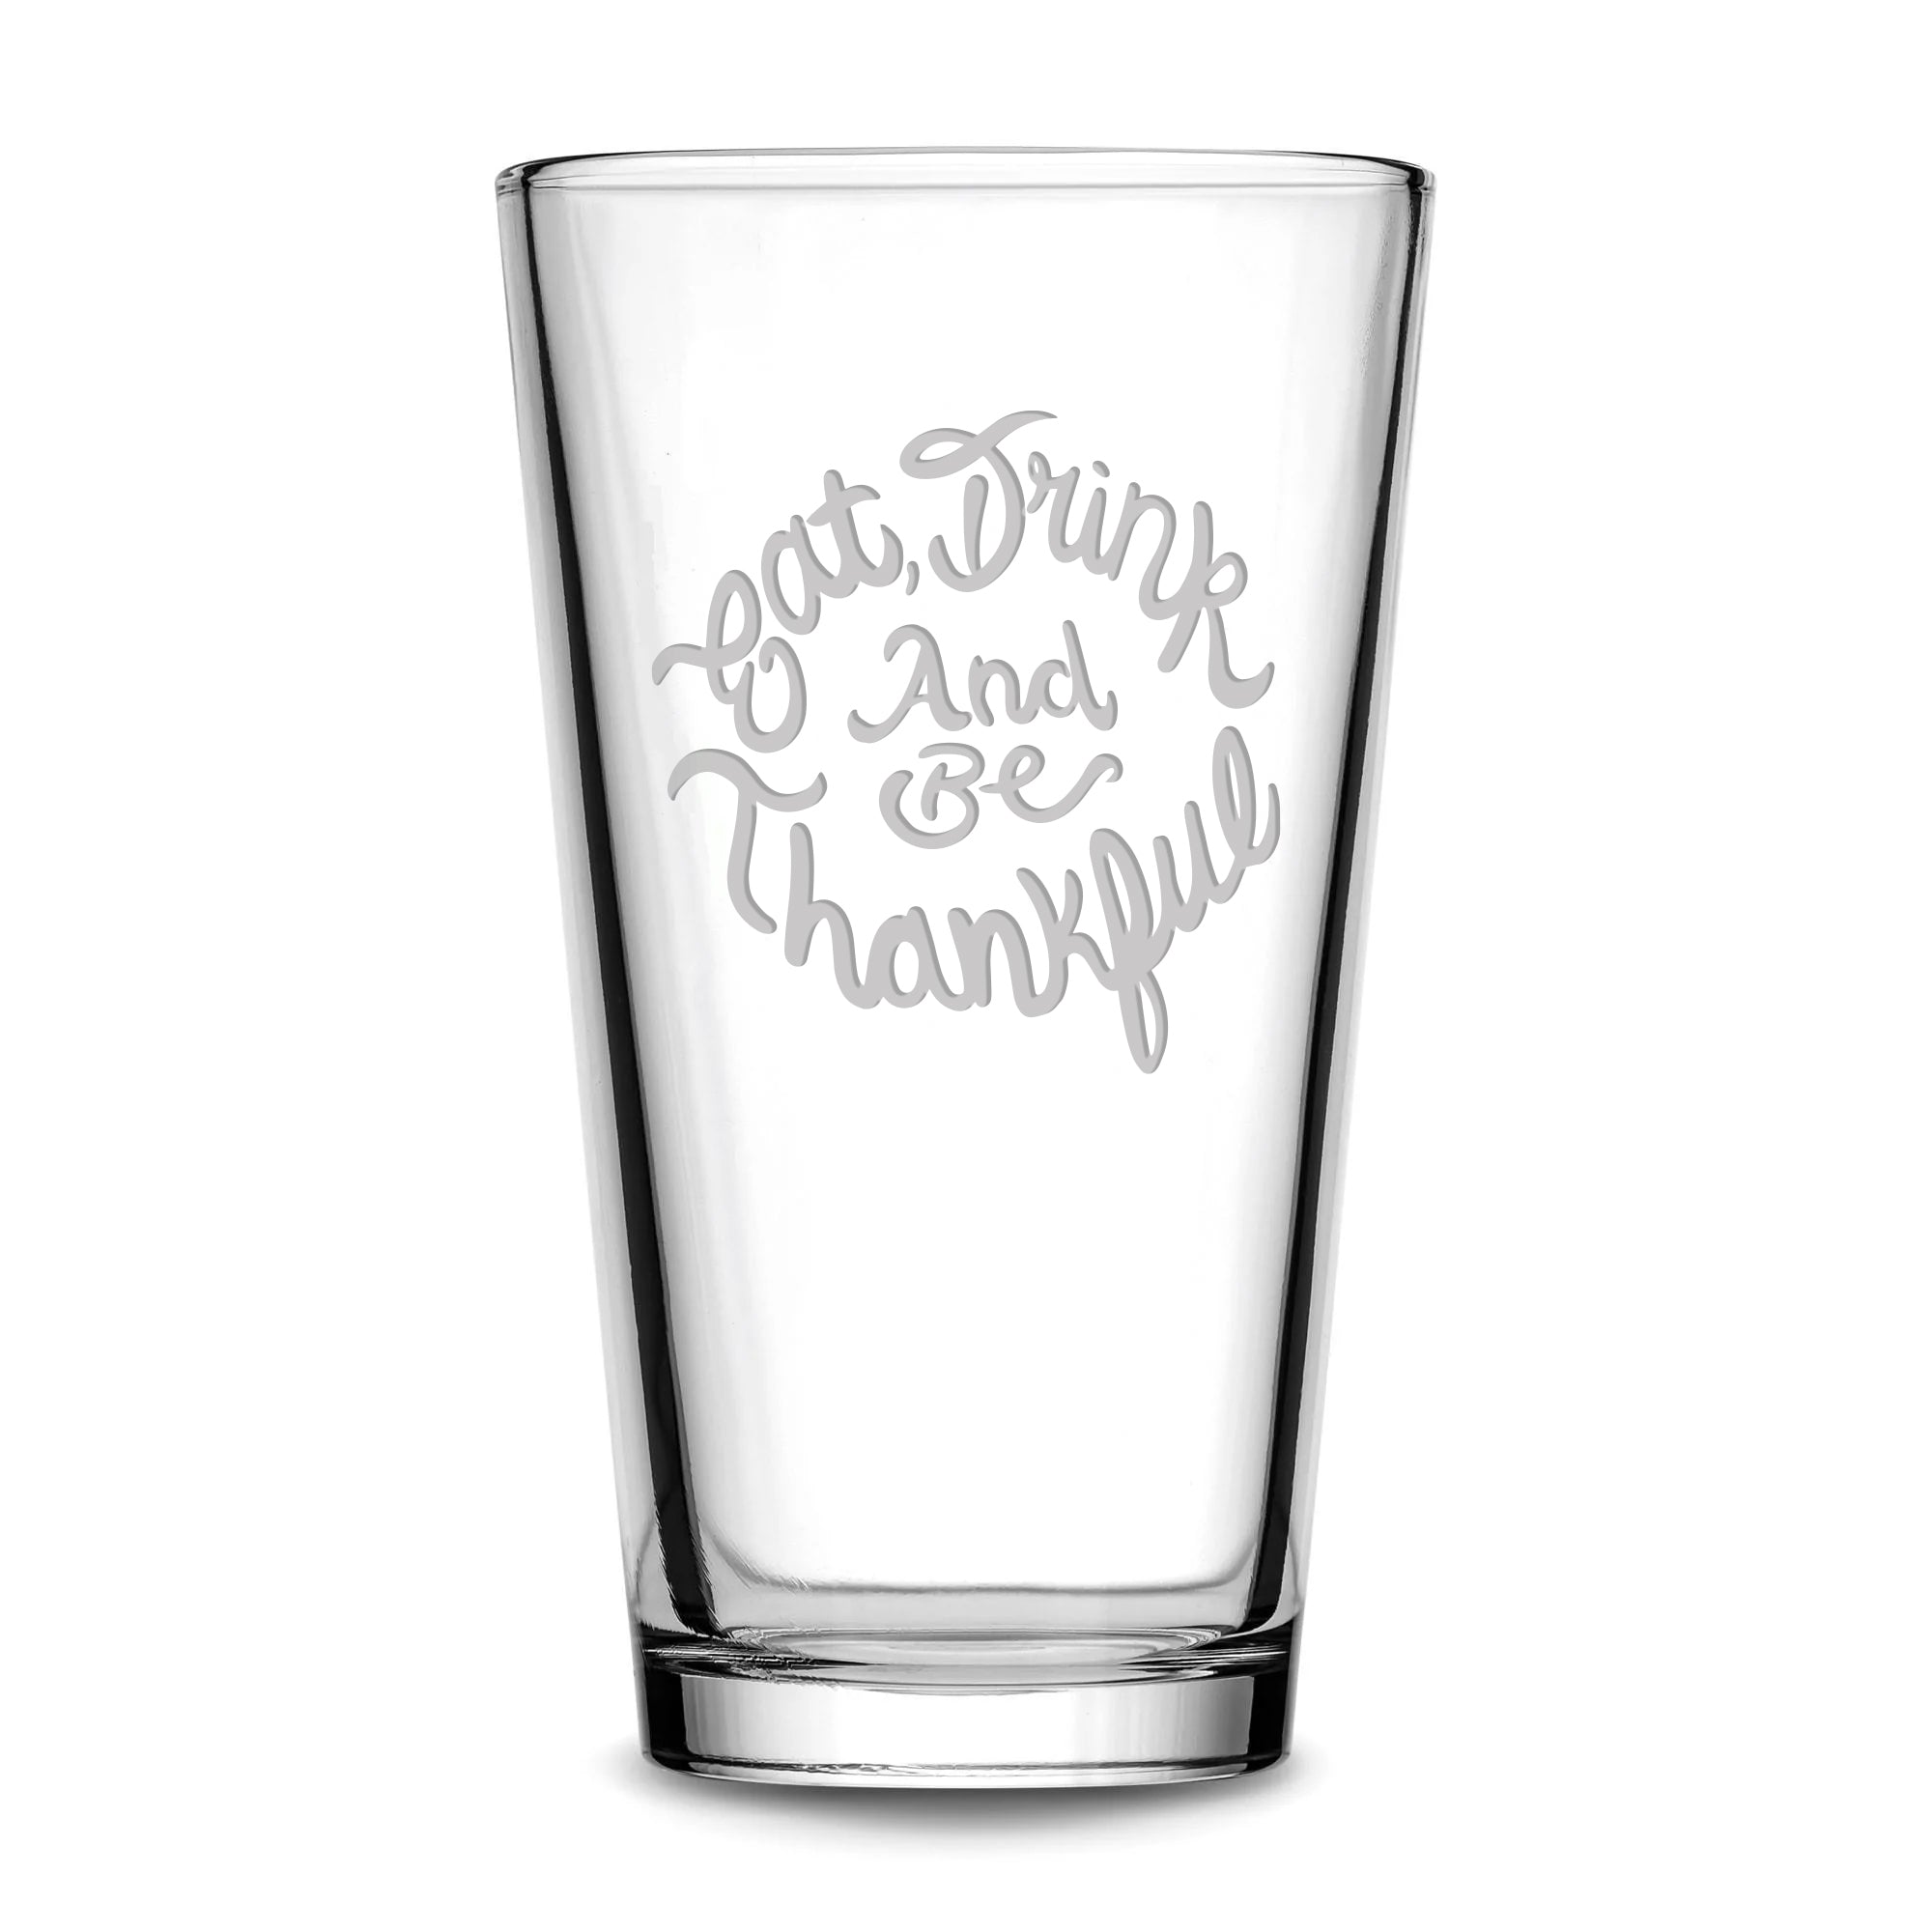 Premium Eat, Drink and Be Thankful, Pint Glass, 16oz